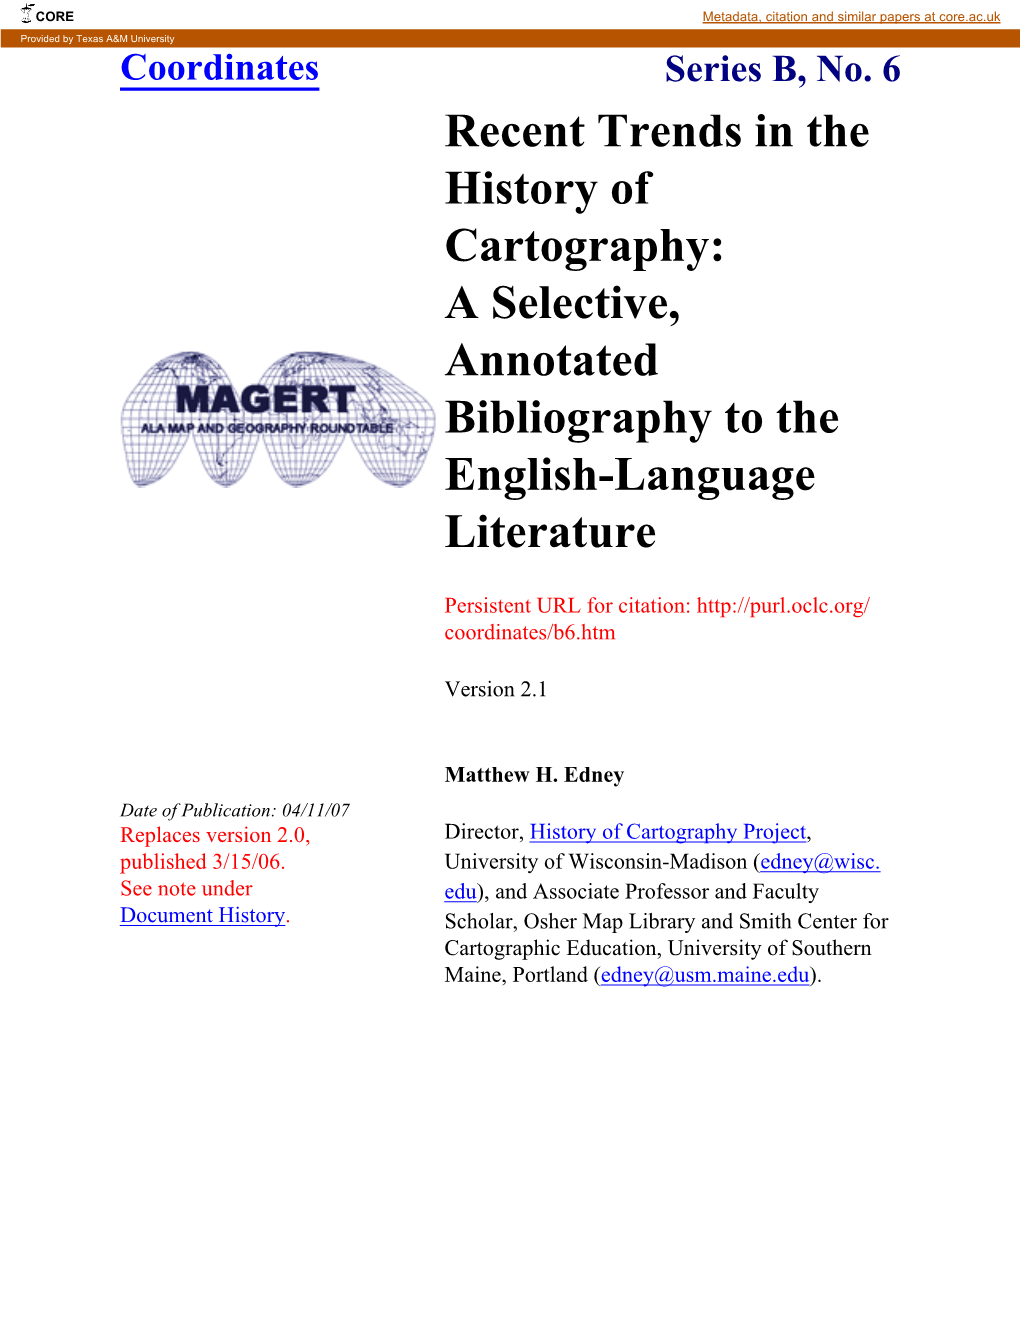 Recent Trends in the History of Cartography: a Selective, Annotated Bibliography to the English-Language